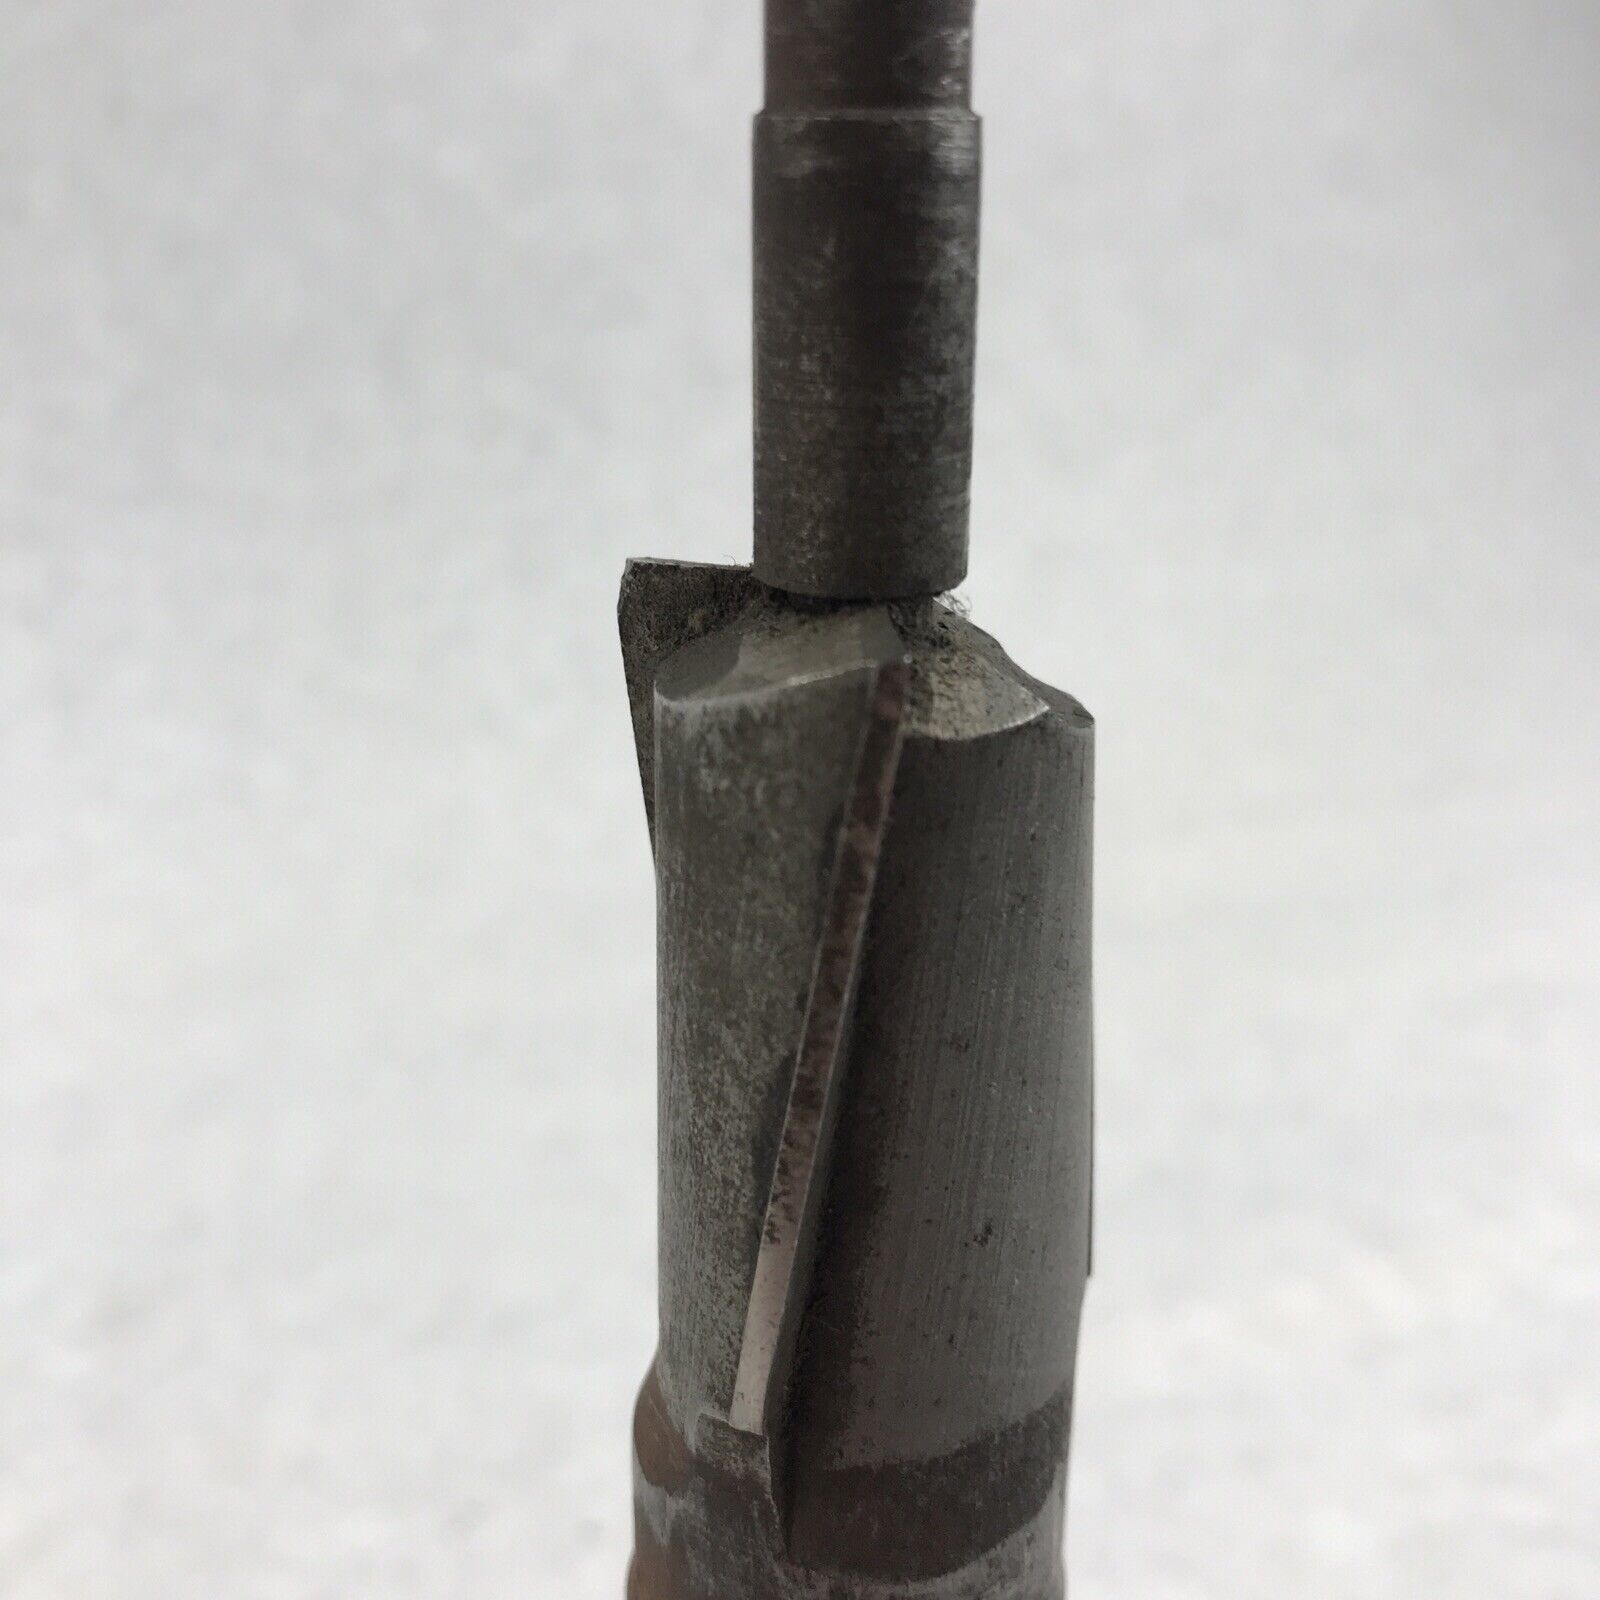 C.T.D Co. 15/16 High Speed Steel A5068 1 1/2" Cutting Length 3-Fluted End Mill